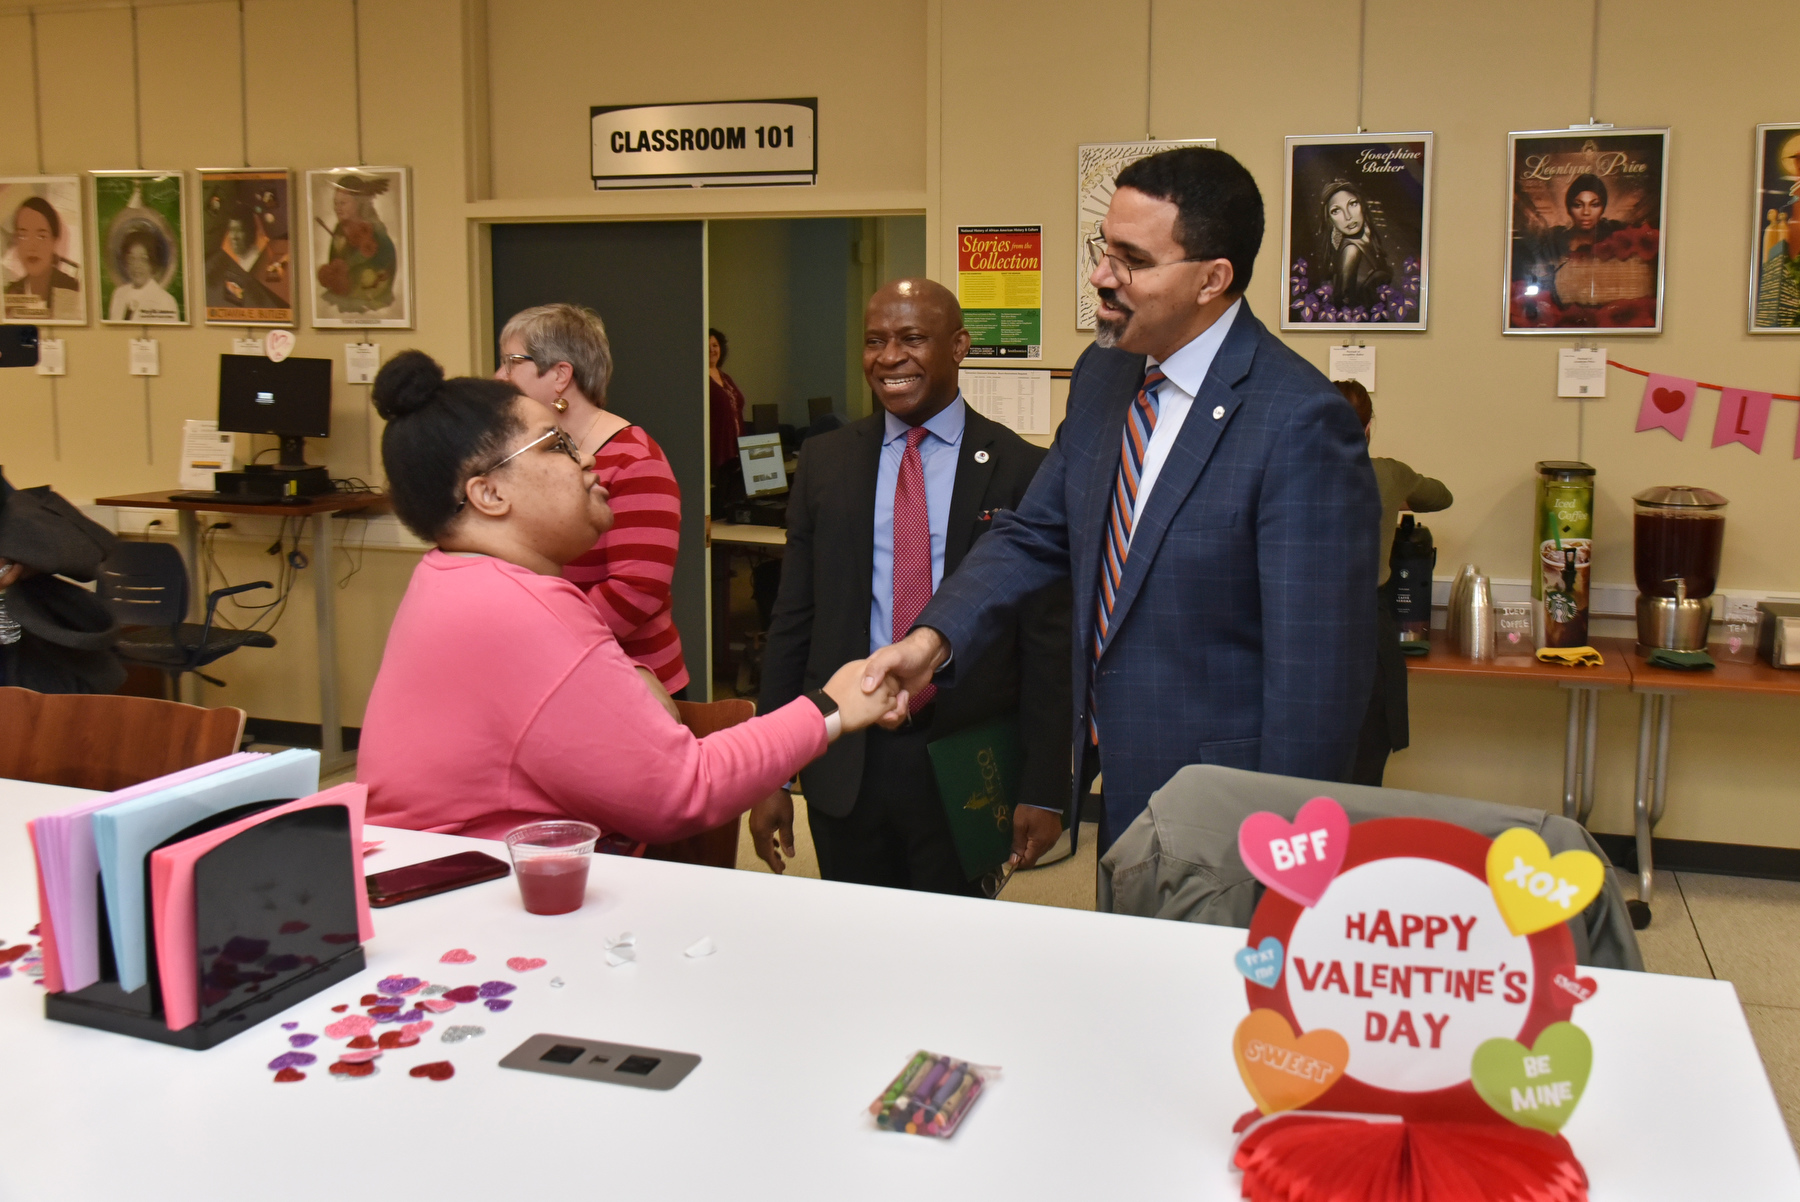 During SUNY Chancellor John B. King Jr.’s visit to SUNY Oswego Feb. 14, he talked with staff and students at "Penfield Loves You Day," annually held on St. Valentine's Day.